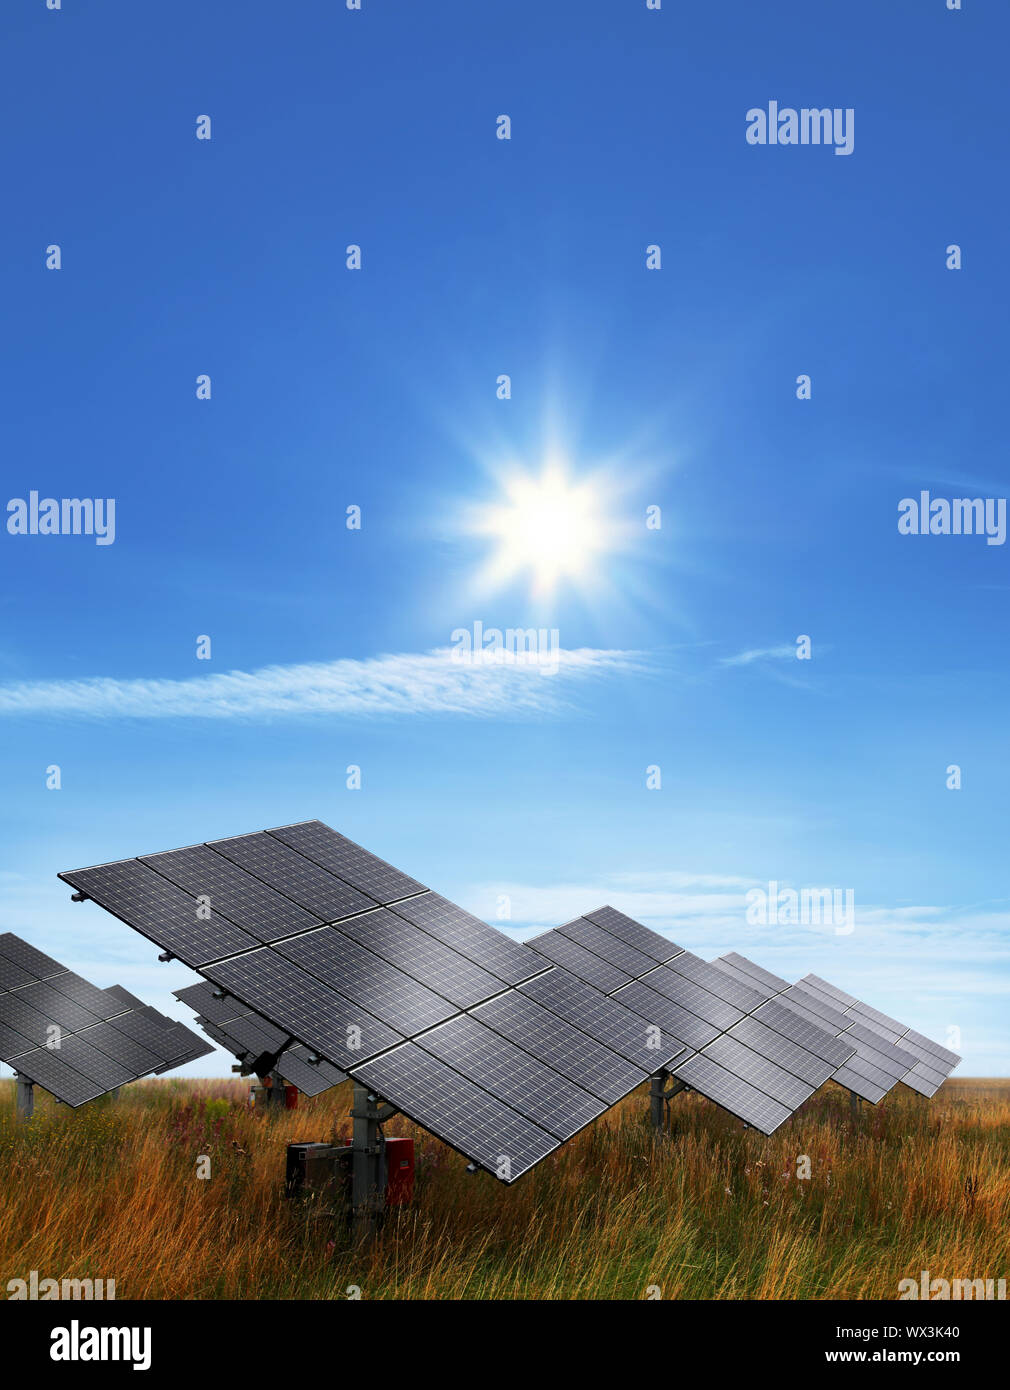 Photovoltaic system with sun Stock Photo